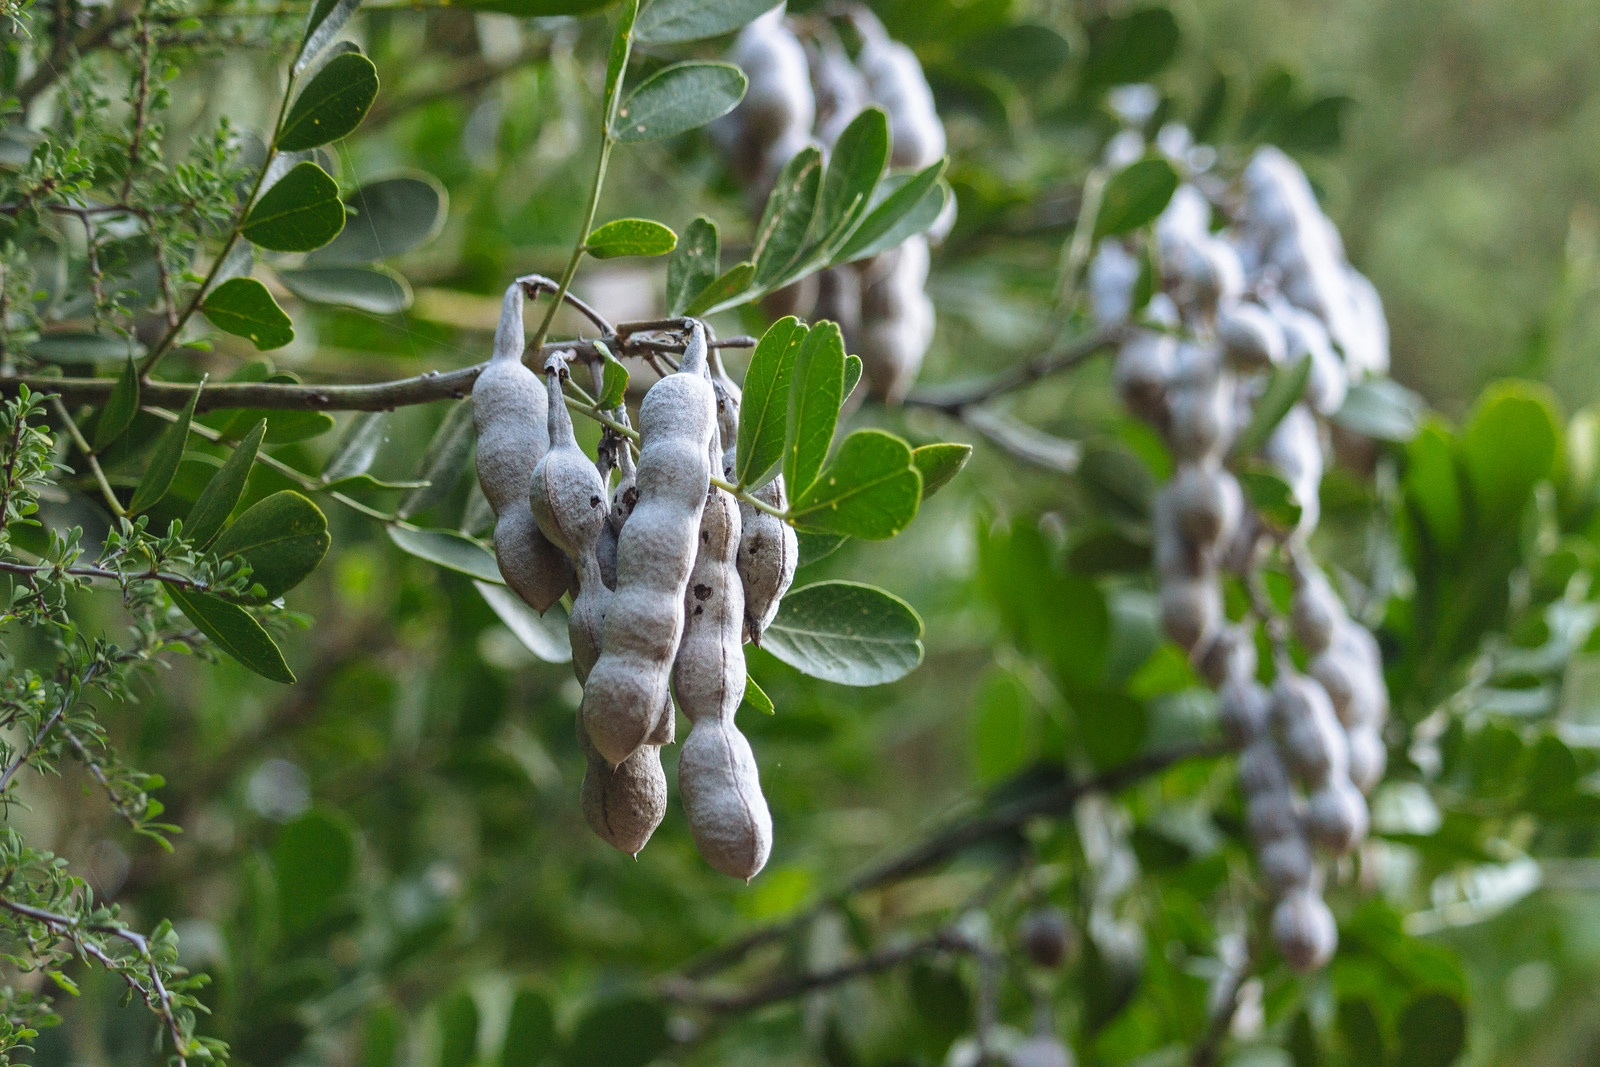 Pale brown lumpy seed pods growing on tree branches